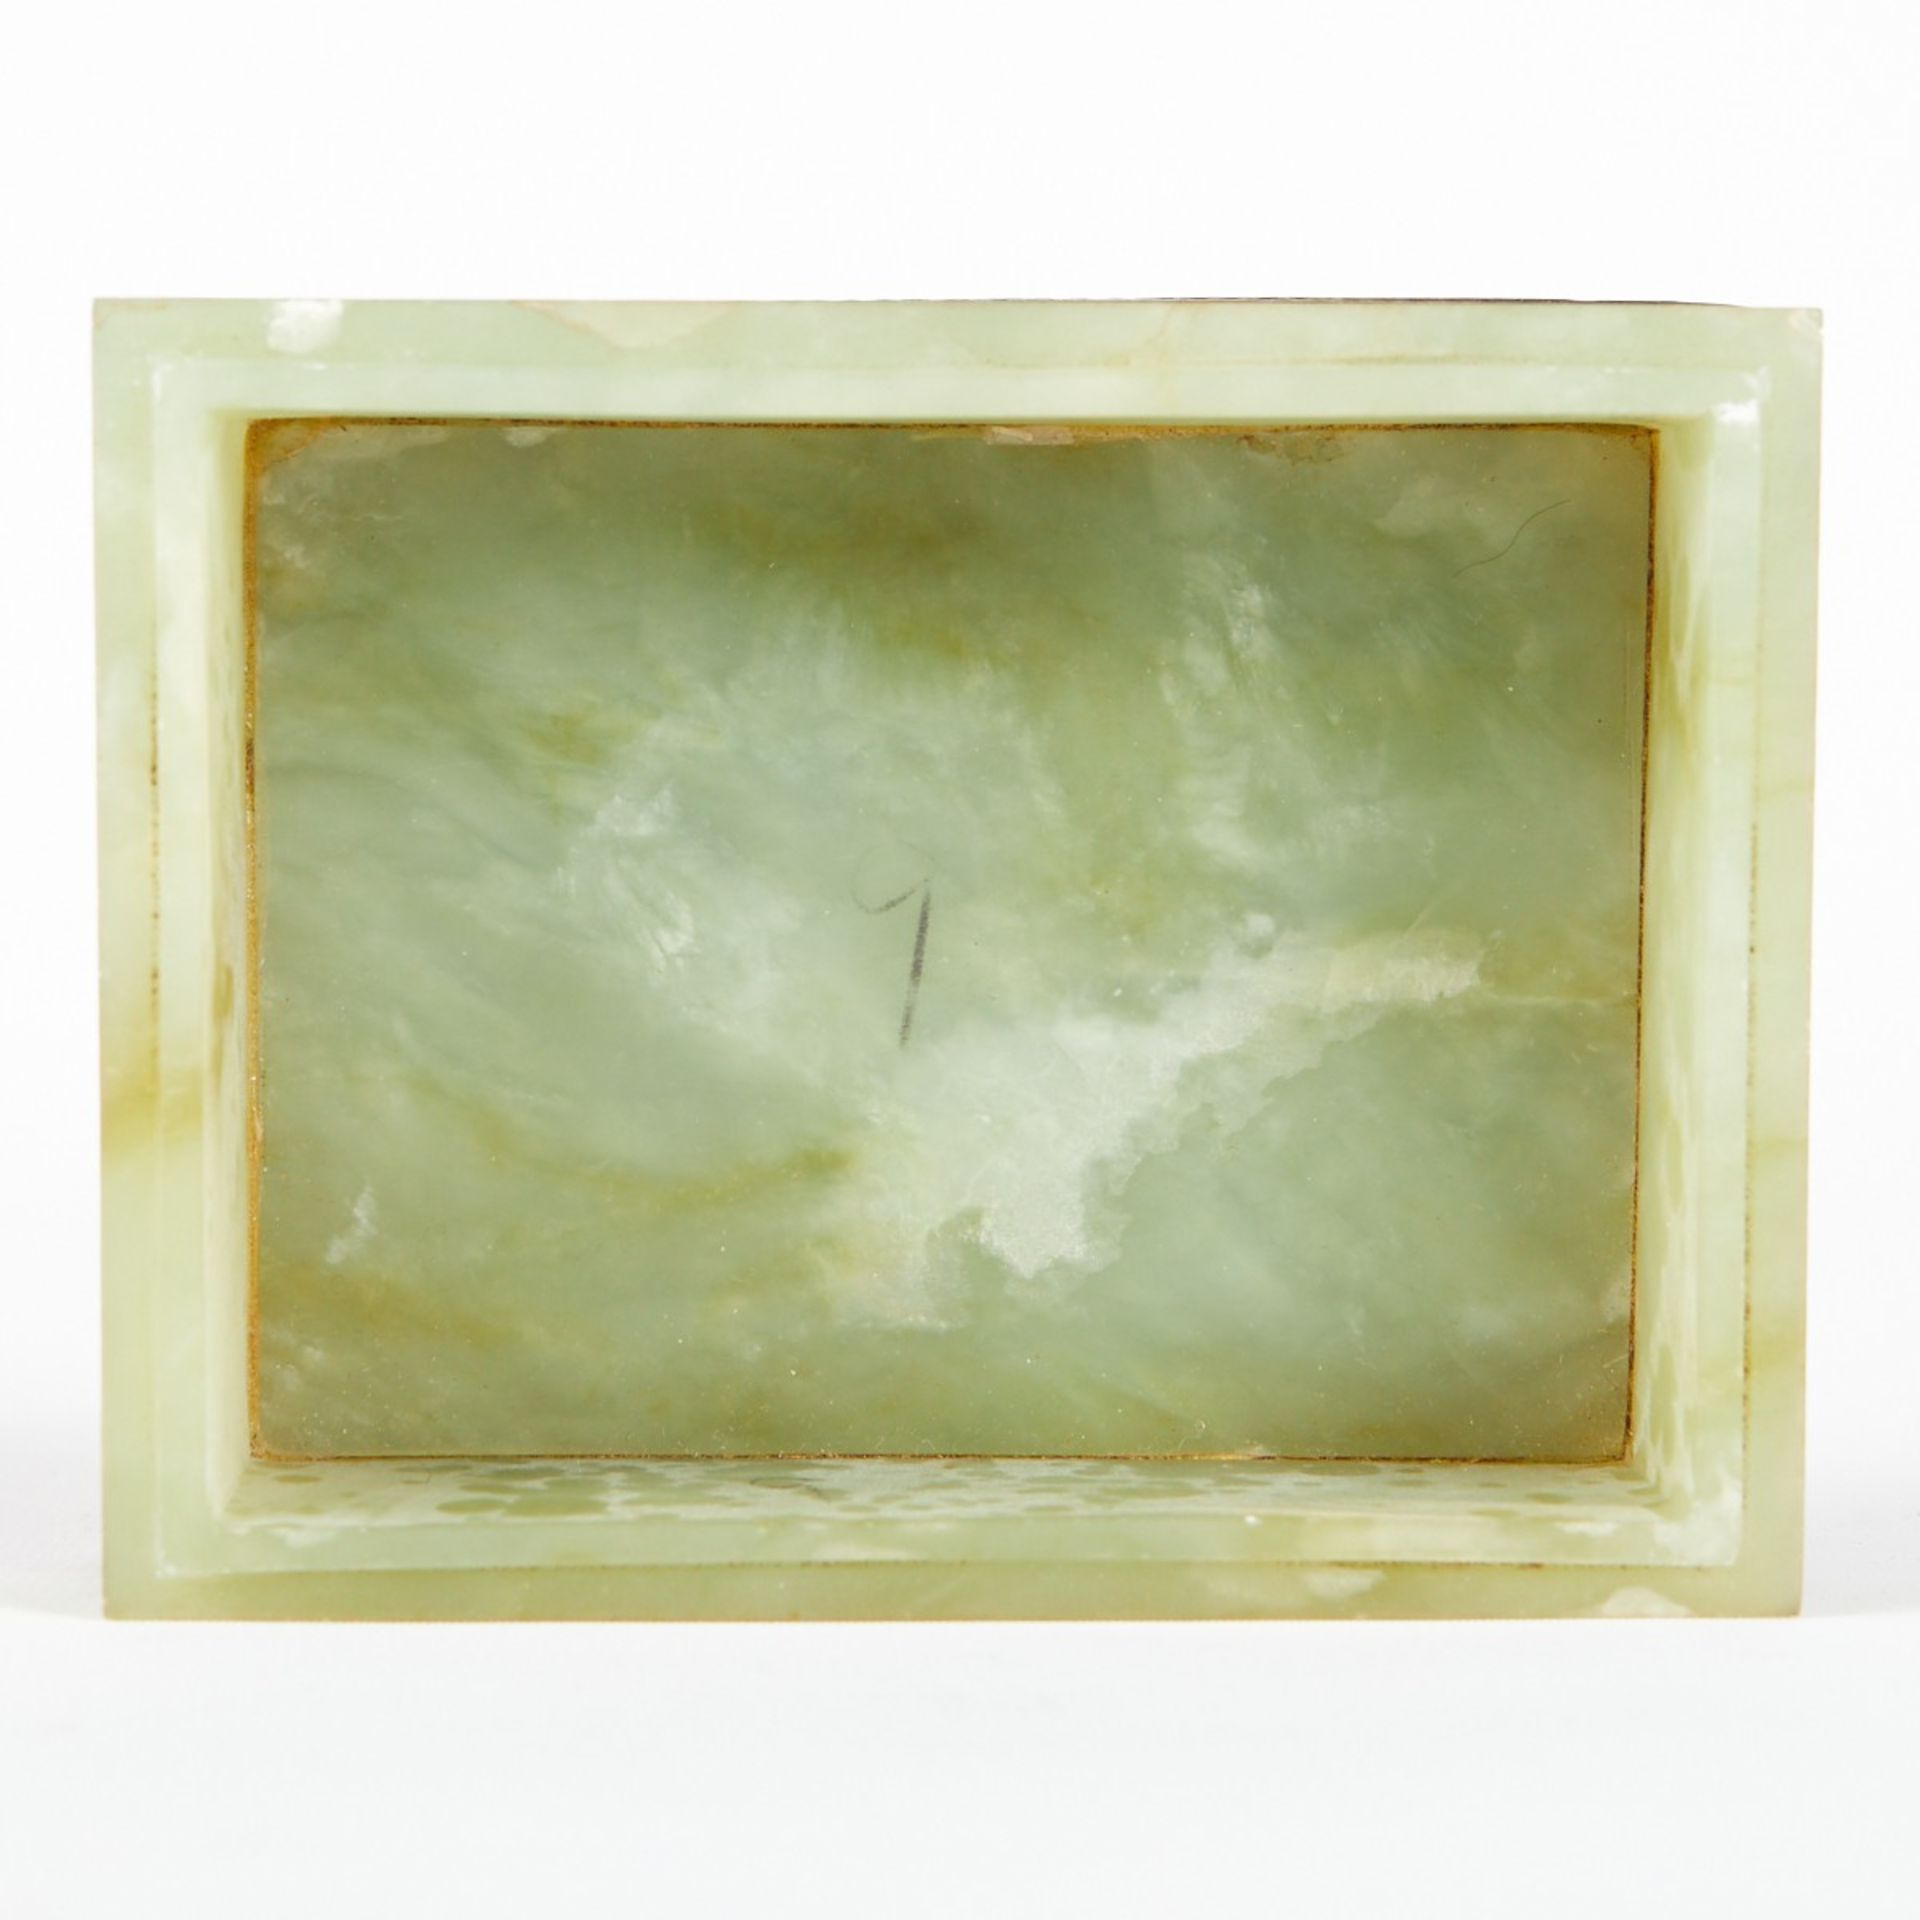 Grp: 3 Small Jade Stone Boxes - Image 7 of 11